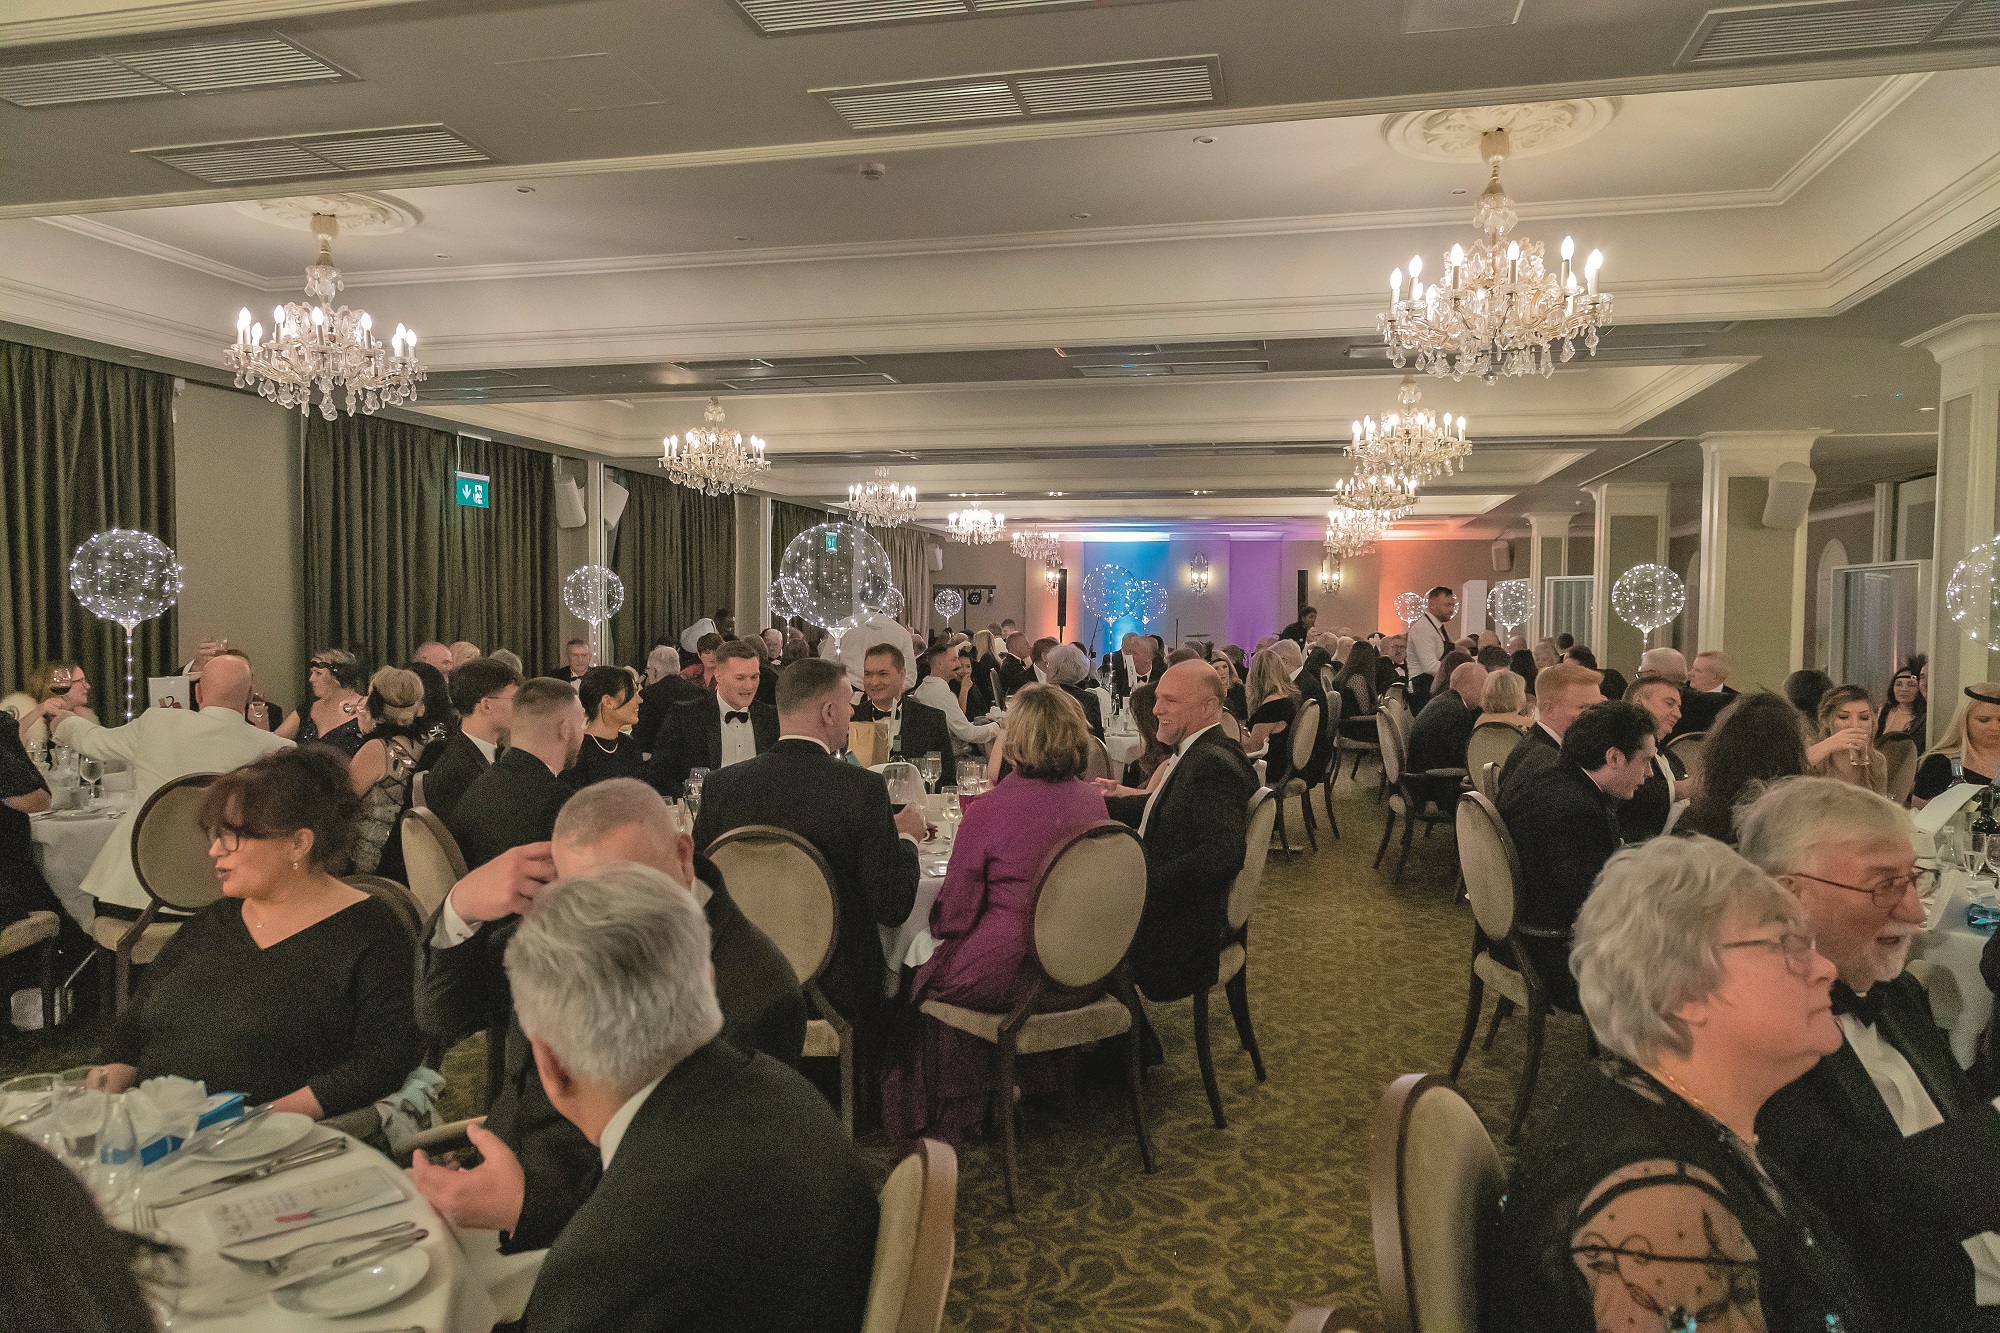 Jersey Freemasons in a banquet hall to celebrate 100 years of Lodge Saint Helier 